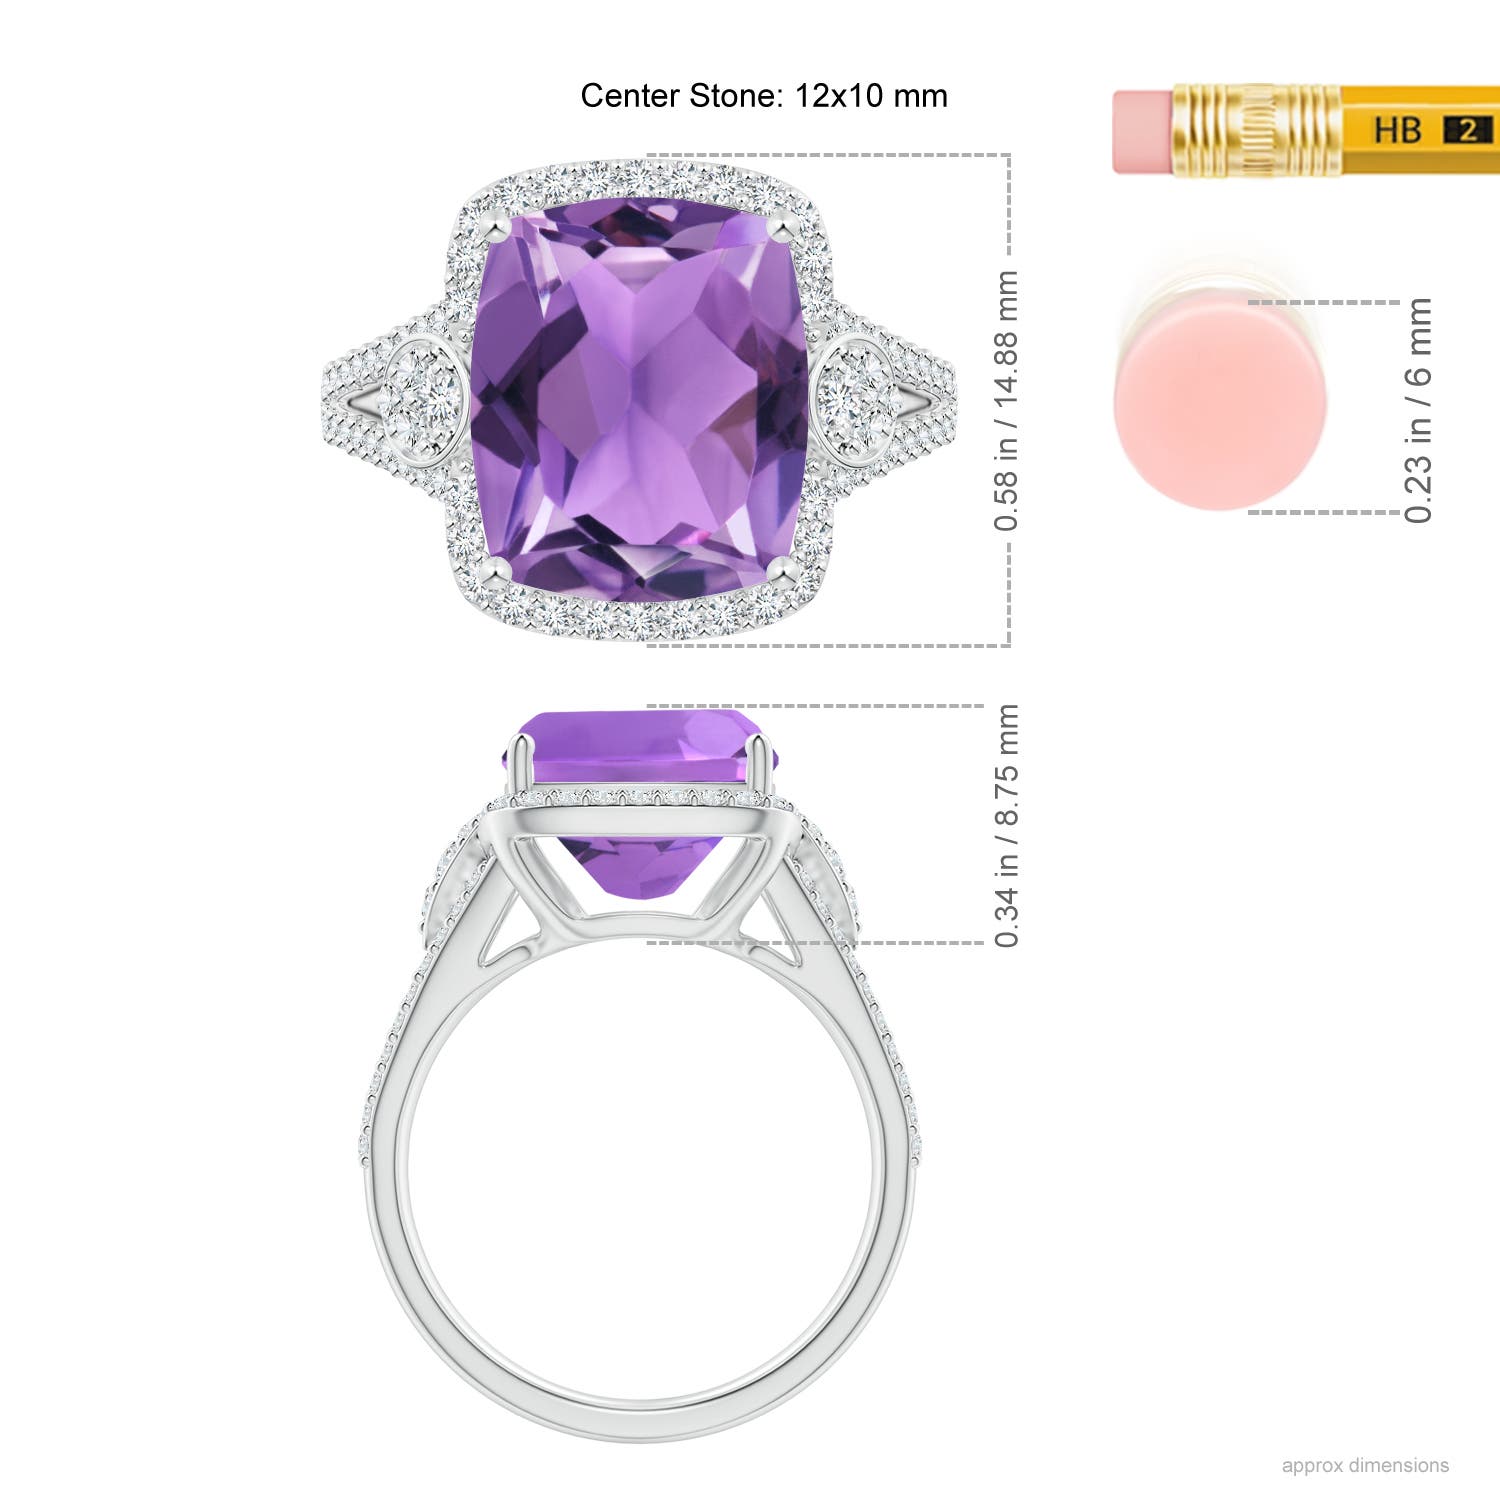 AA - Amethyst / 5.06 CT / 14 KT White Gold